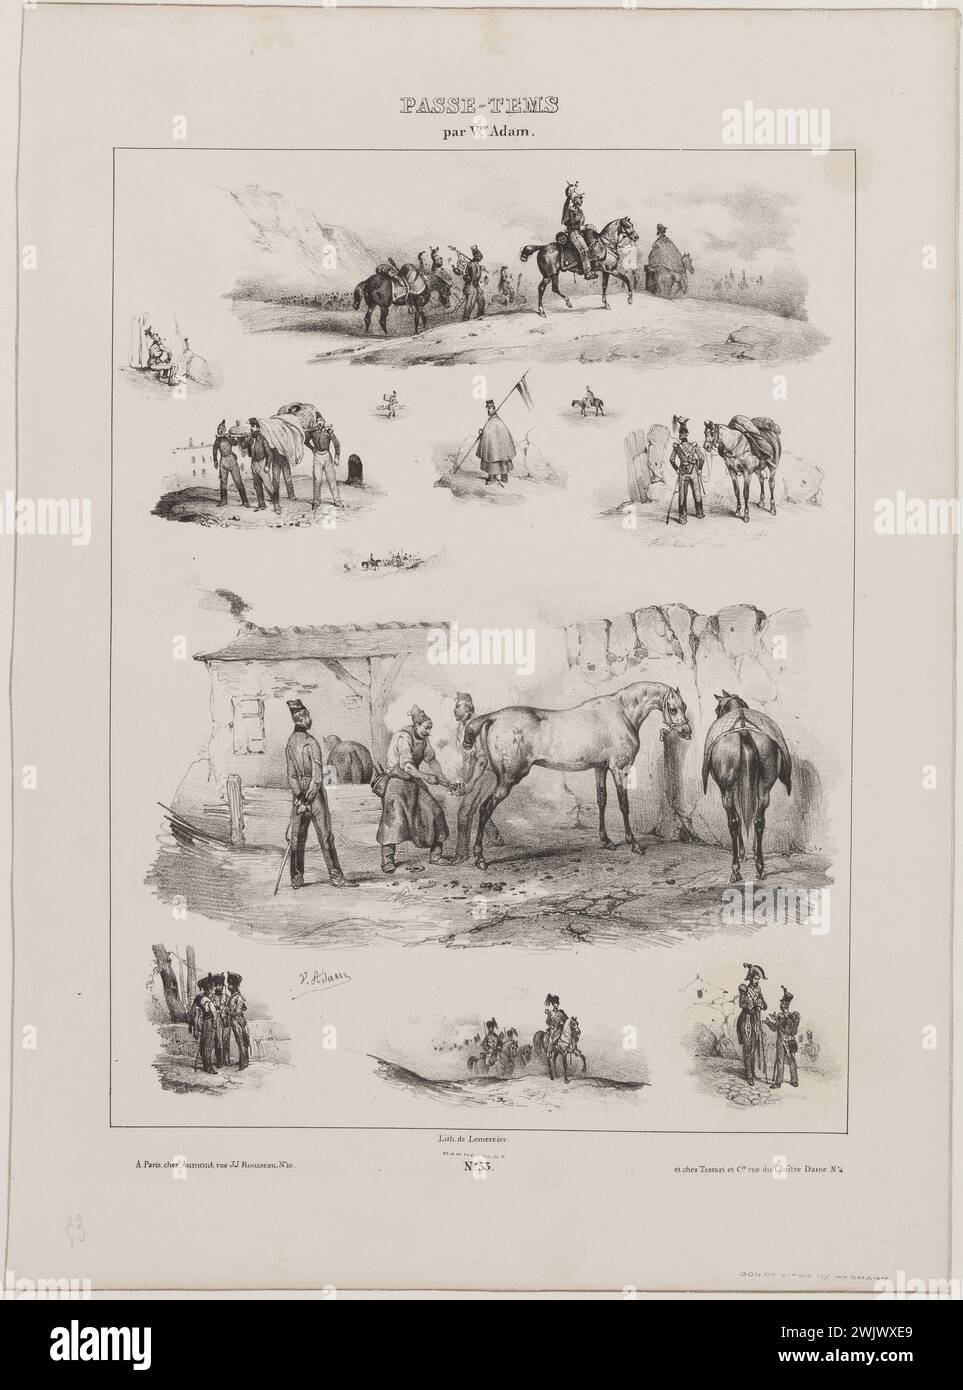 Jean-Victor Adam, known as Victor Adam (1801-1866), French painter and lithographer. Album 'Passe-temps' (Pl.53). Lithography, 19th century. Paris, Carnavalet museum. 78051-3 Passe-time album, rider, horse, drawing, ferrer, illustration, lithography, character, soldier, 19th 19th 19th 19th 19th 19th century, animal Stock Photo